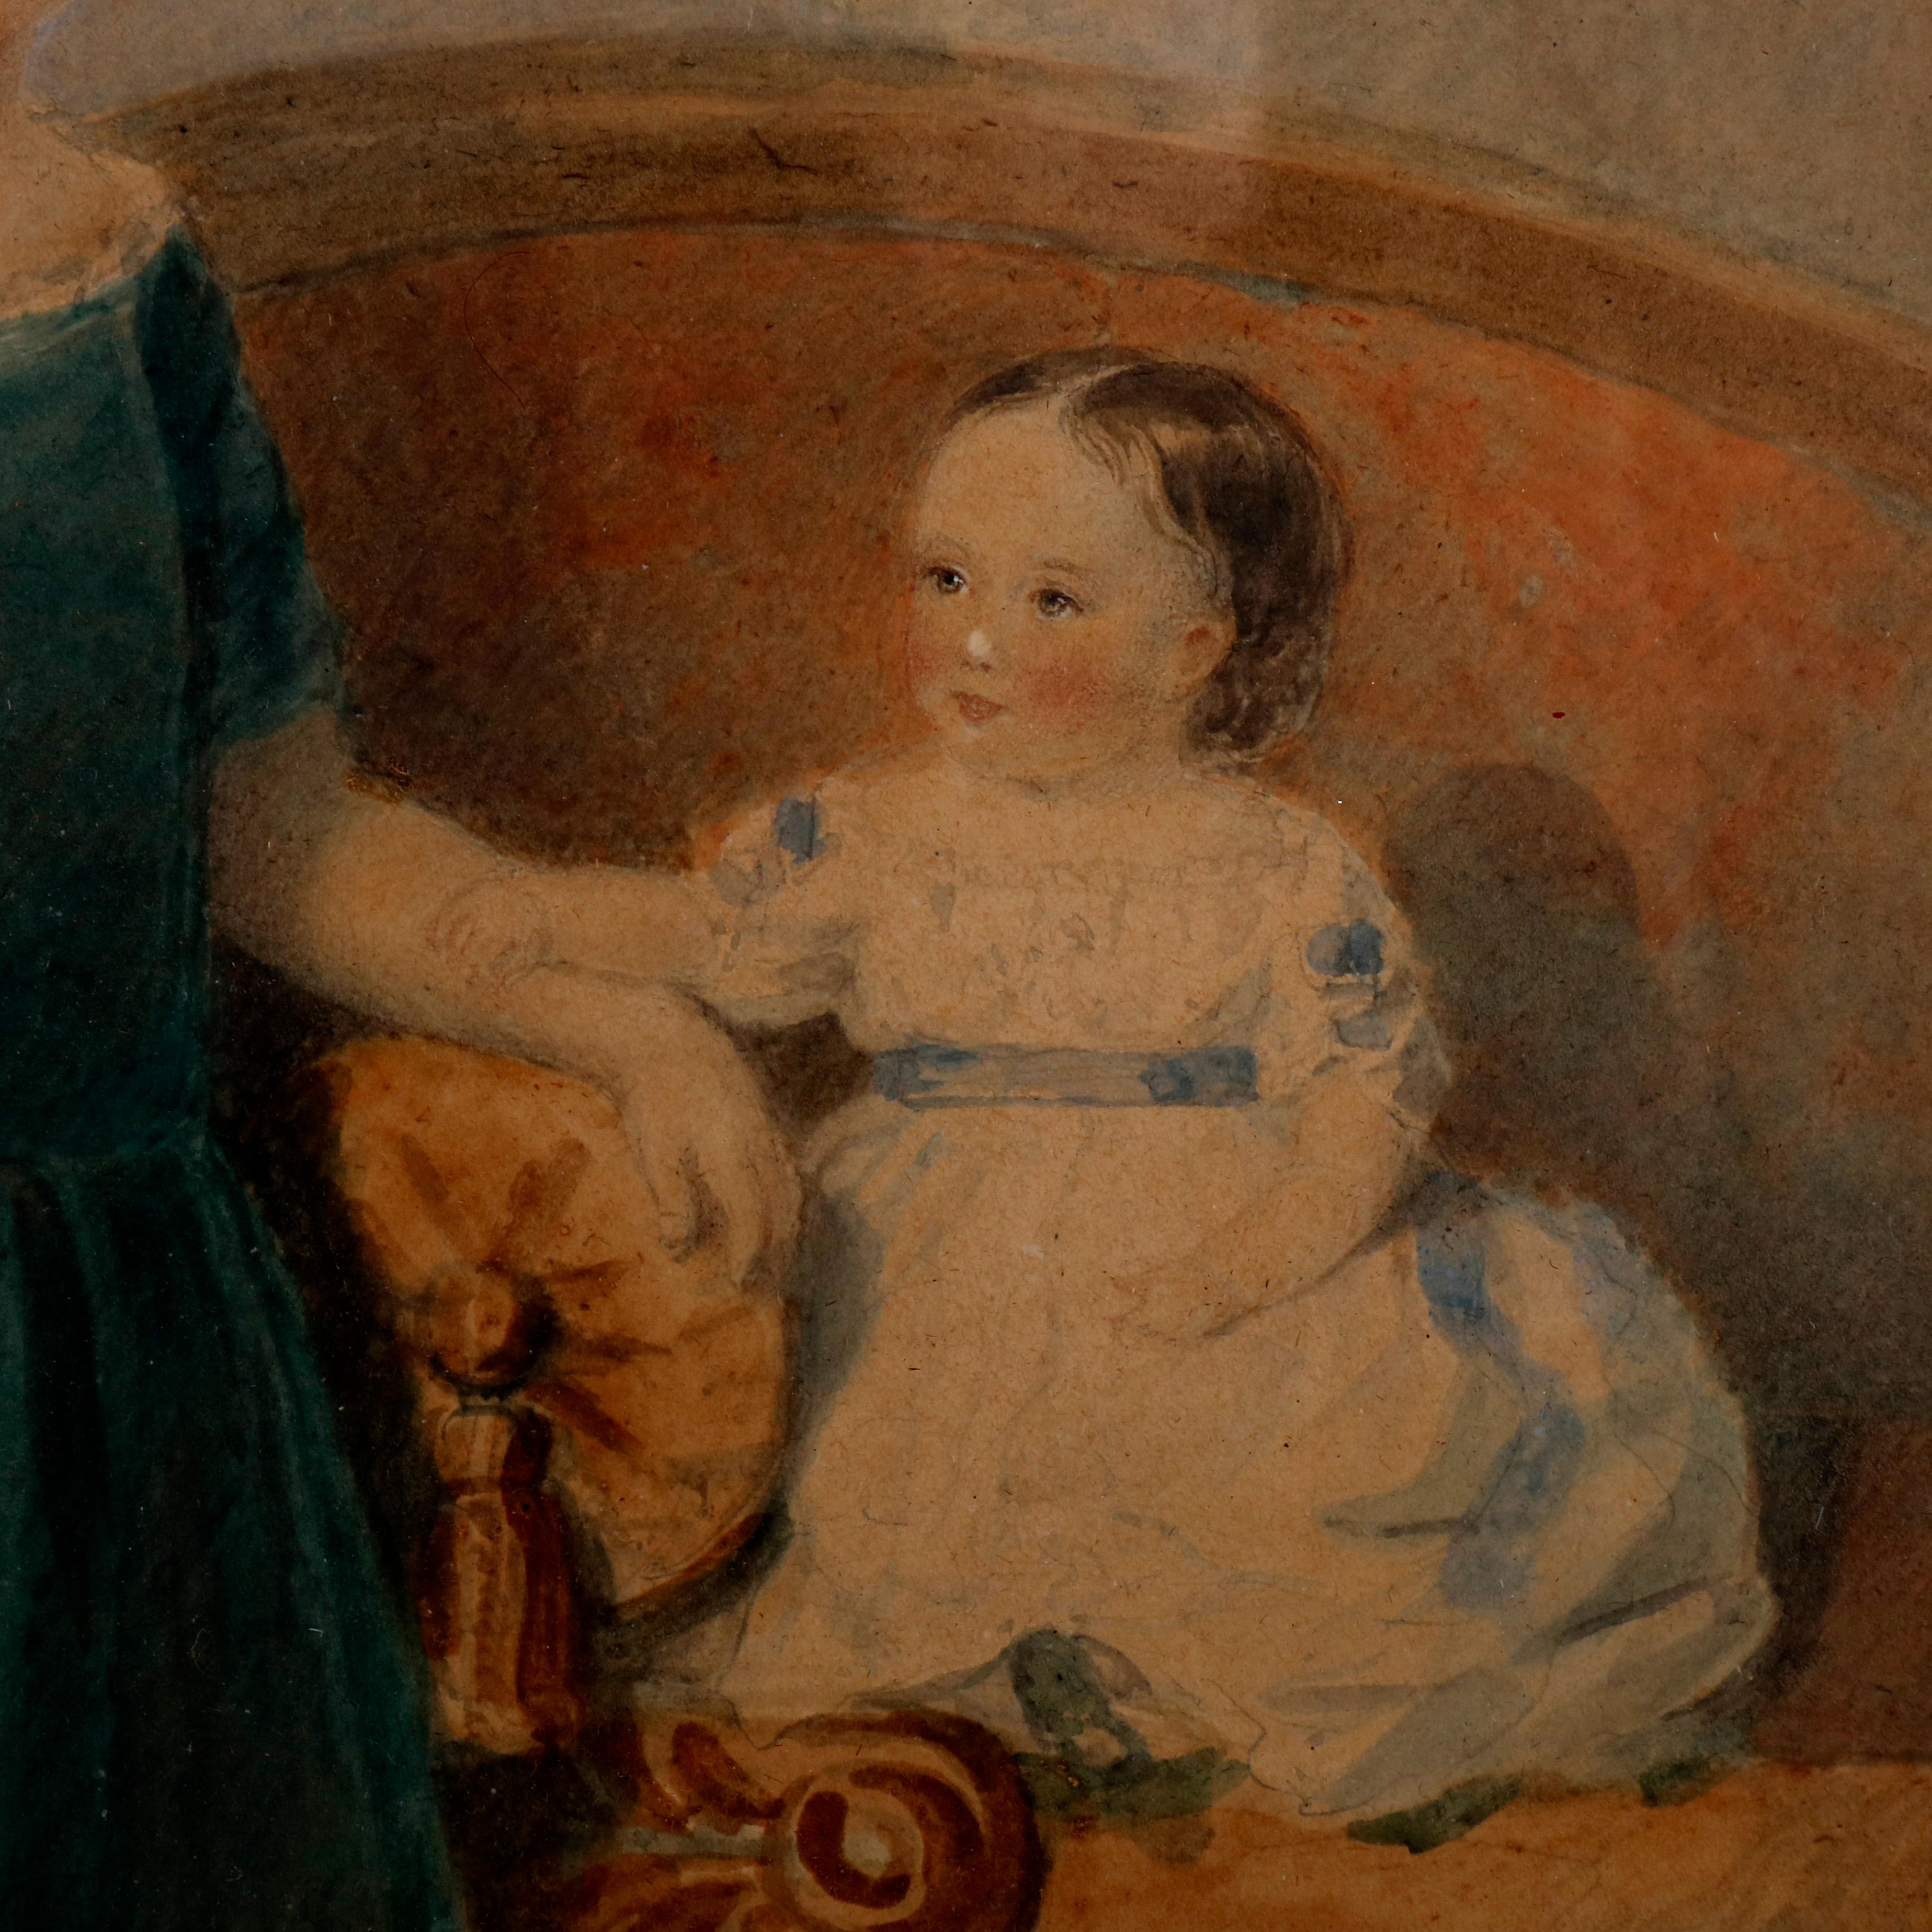 Gilt Early American Watercolor Portrait Painting of Child Siblings, circa 1840